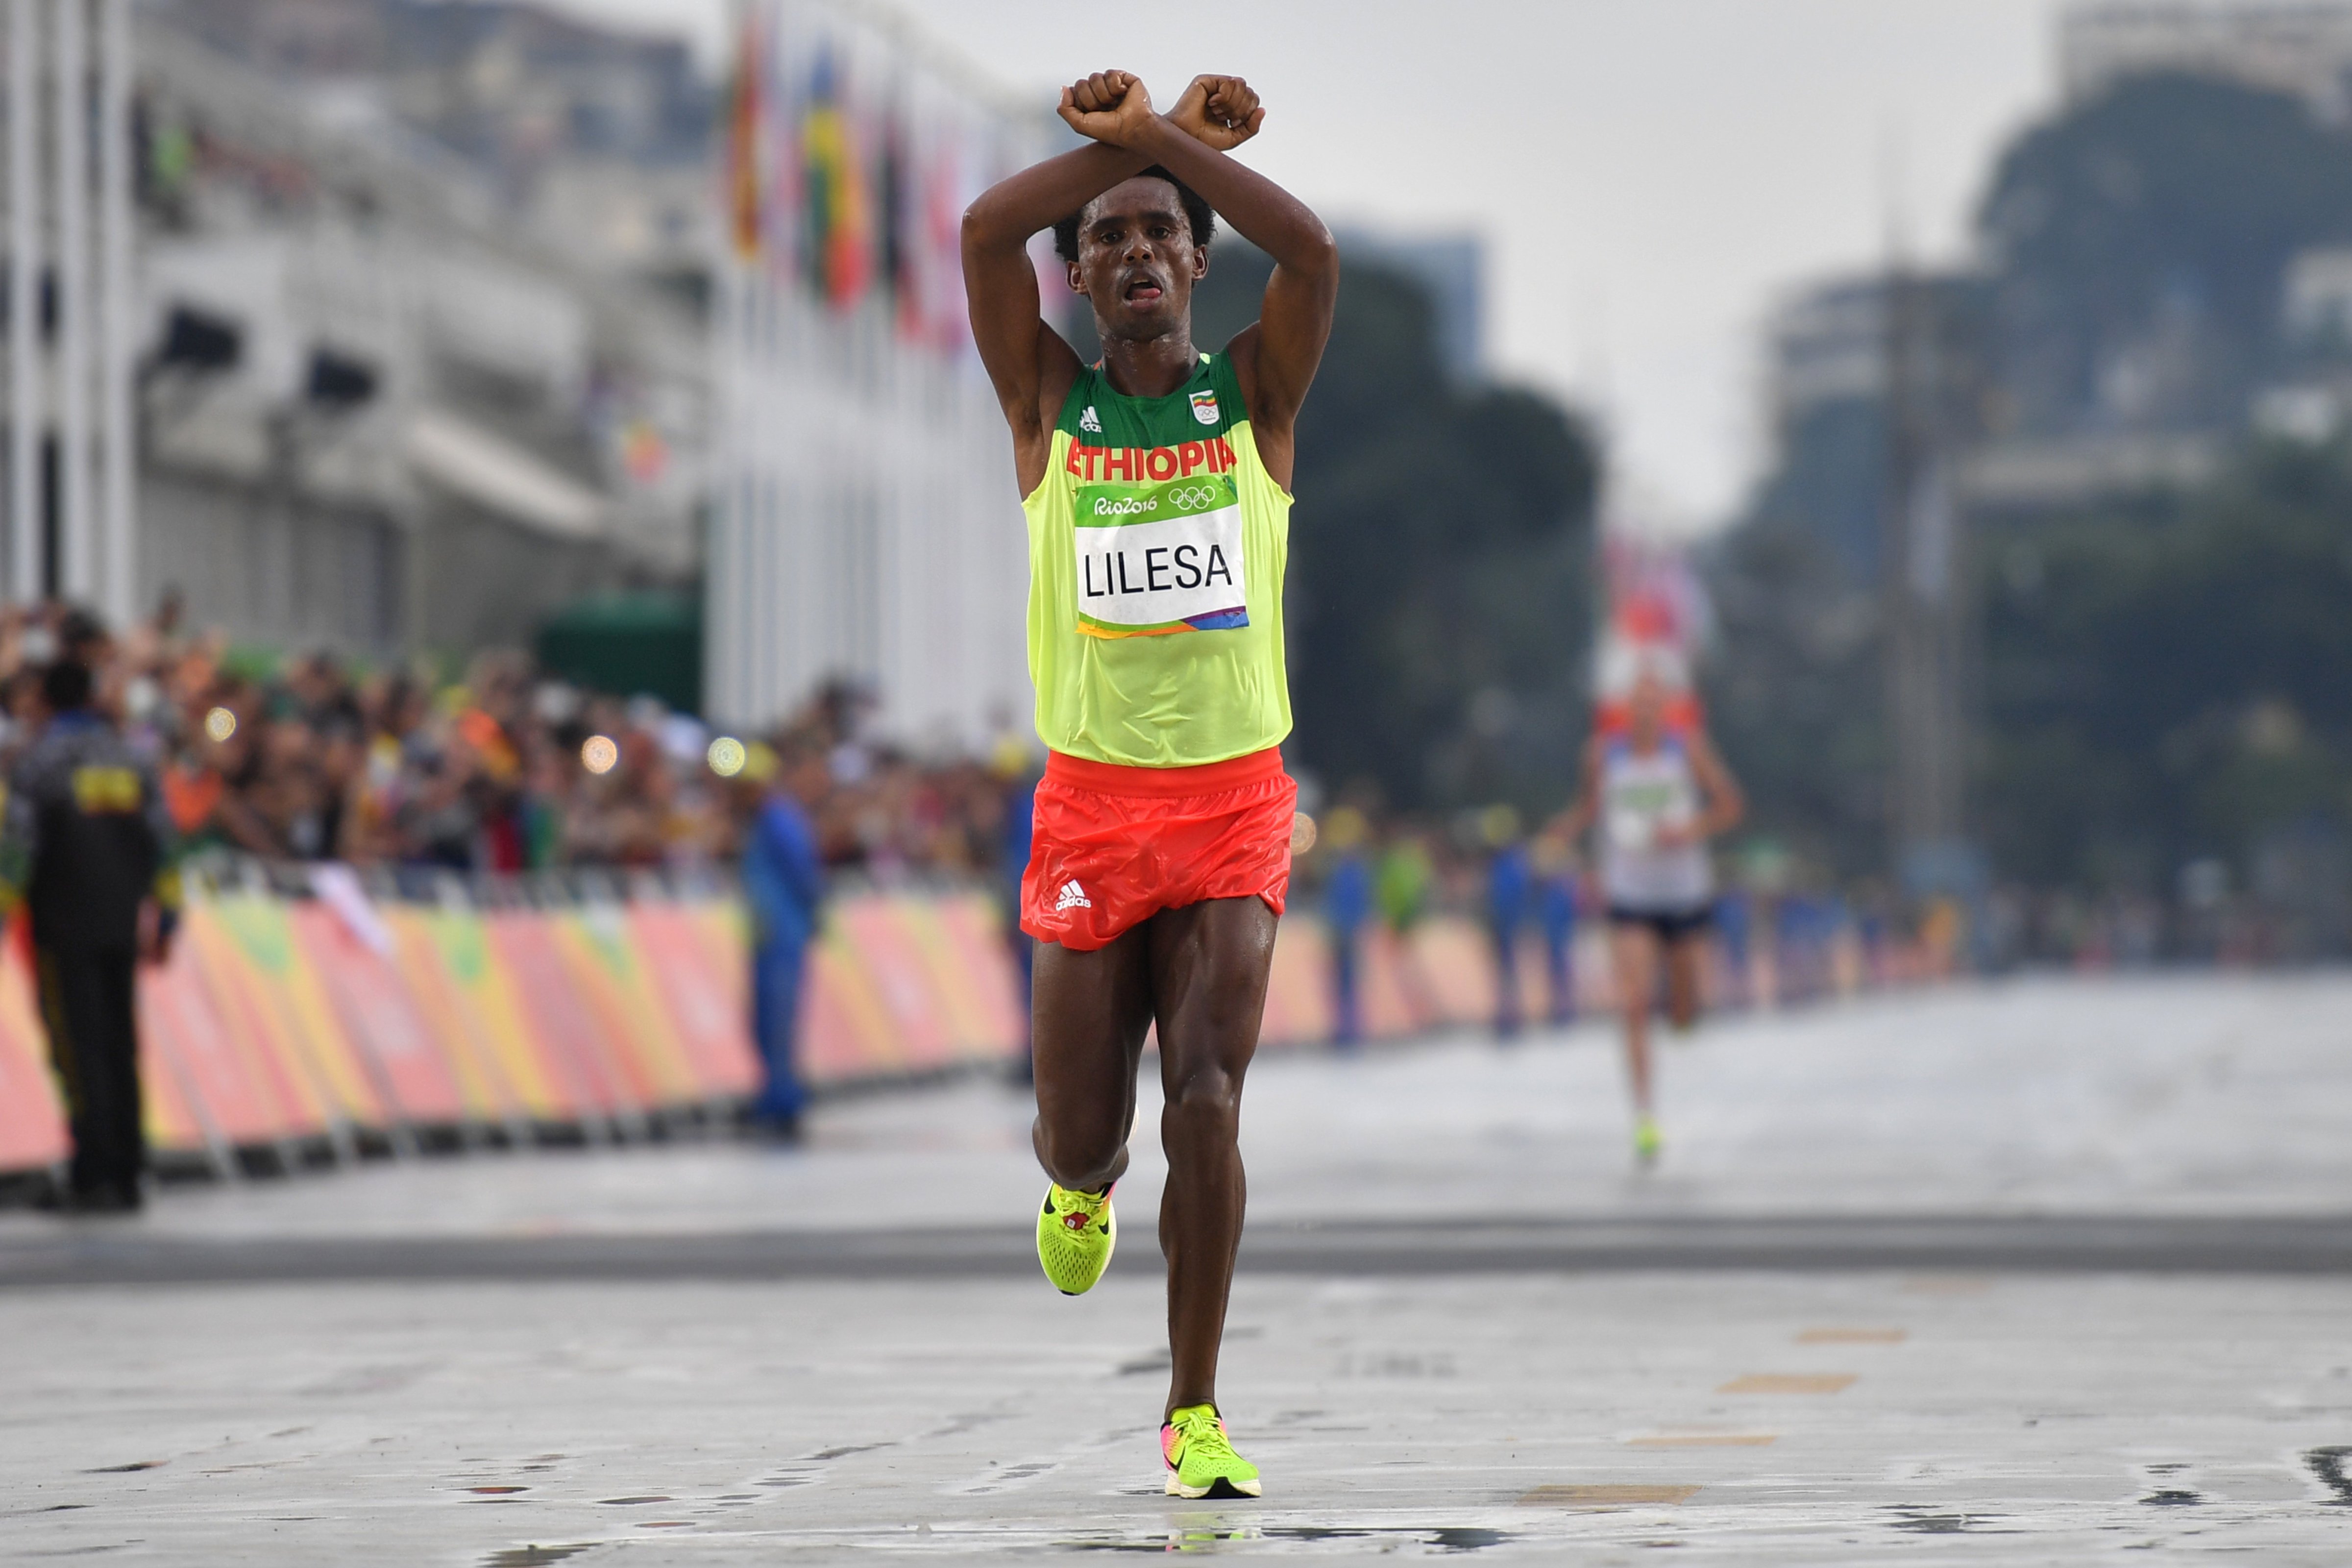 Ethiopia's Feyisa Lilesa crosses the finish line of the men's marathon athletics event at the Olympic Games in Rio de Janeiro on Aug. 21, 2016 (Olivier Morin—AFP/Getty Images)